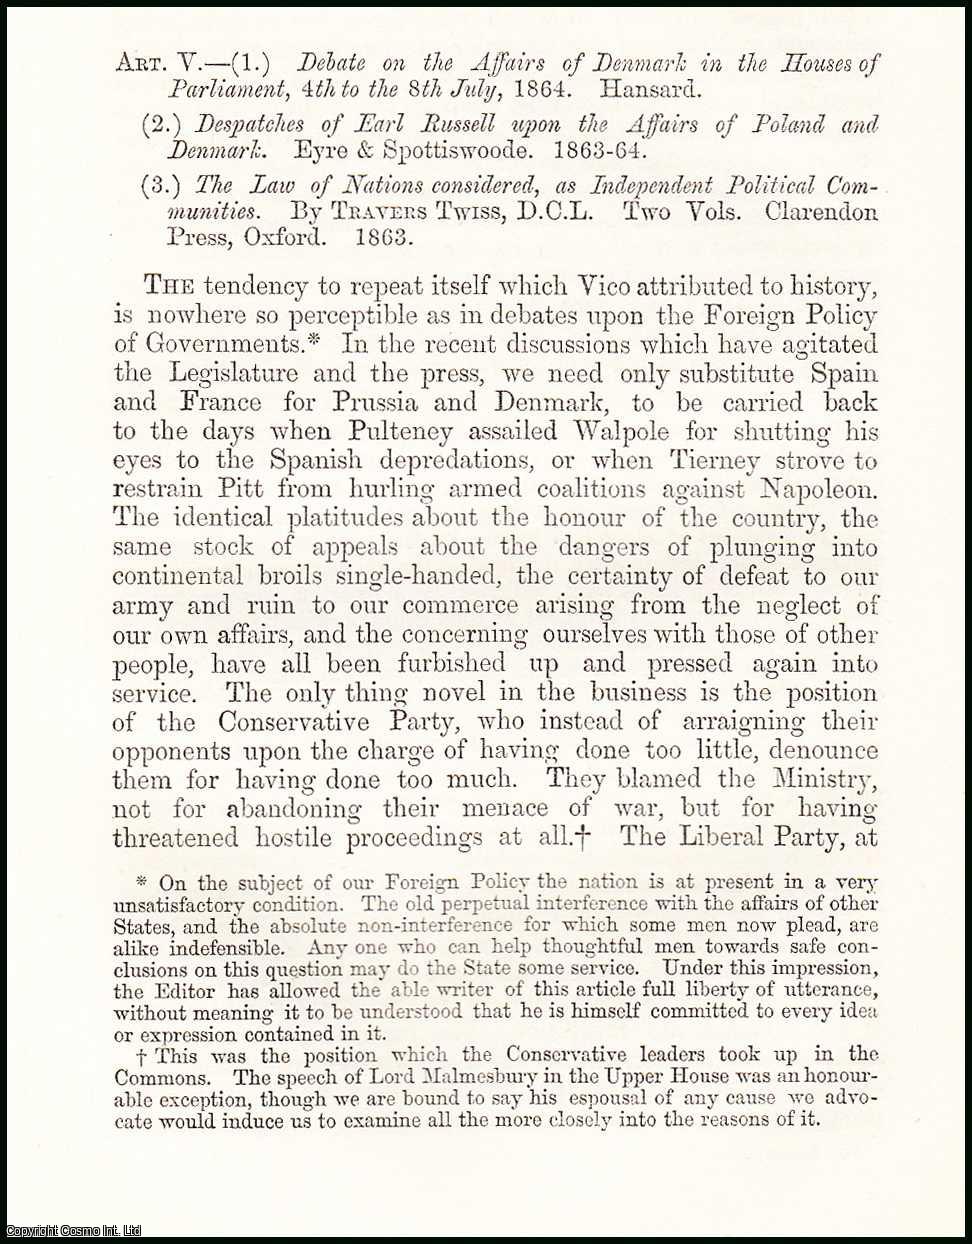 Author Unknown - Our Foreign Policy. A rare original article from the British Quarterly Review, 1864.